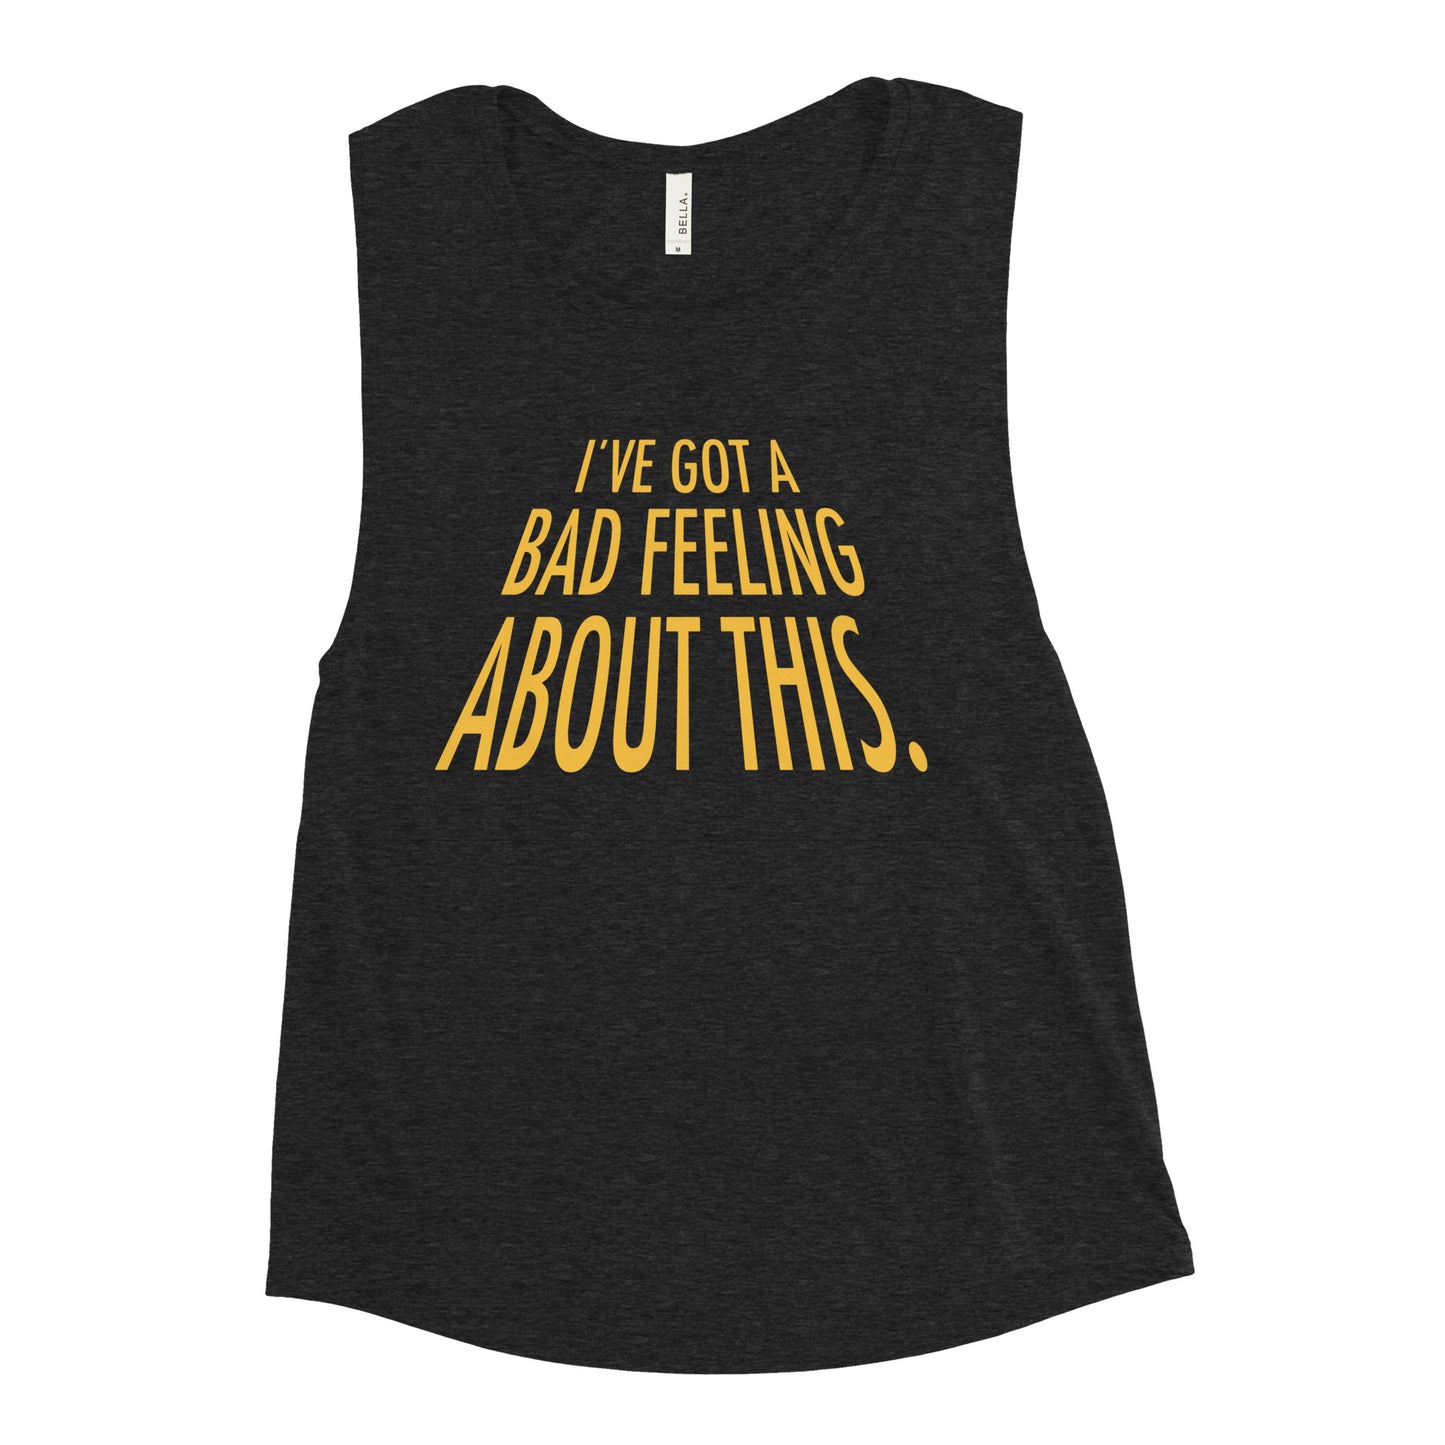 I've Got A Bad Feeling About This Women's Muscle Tank